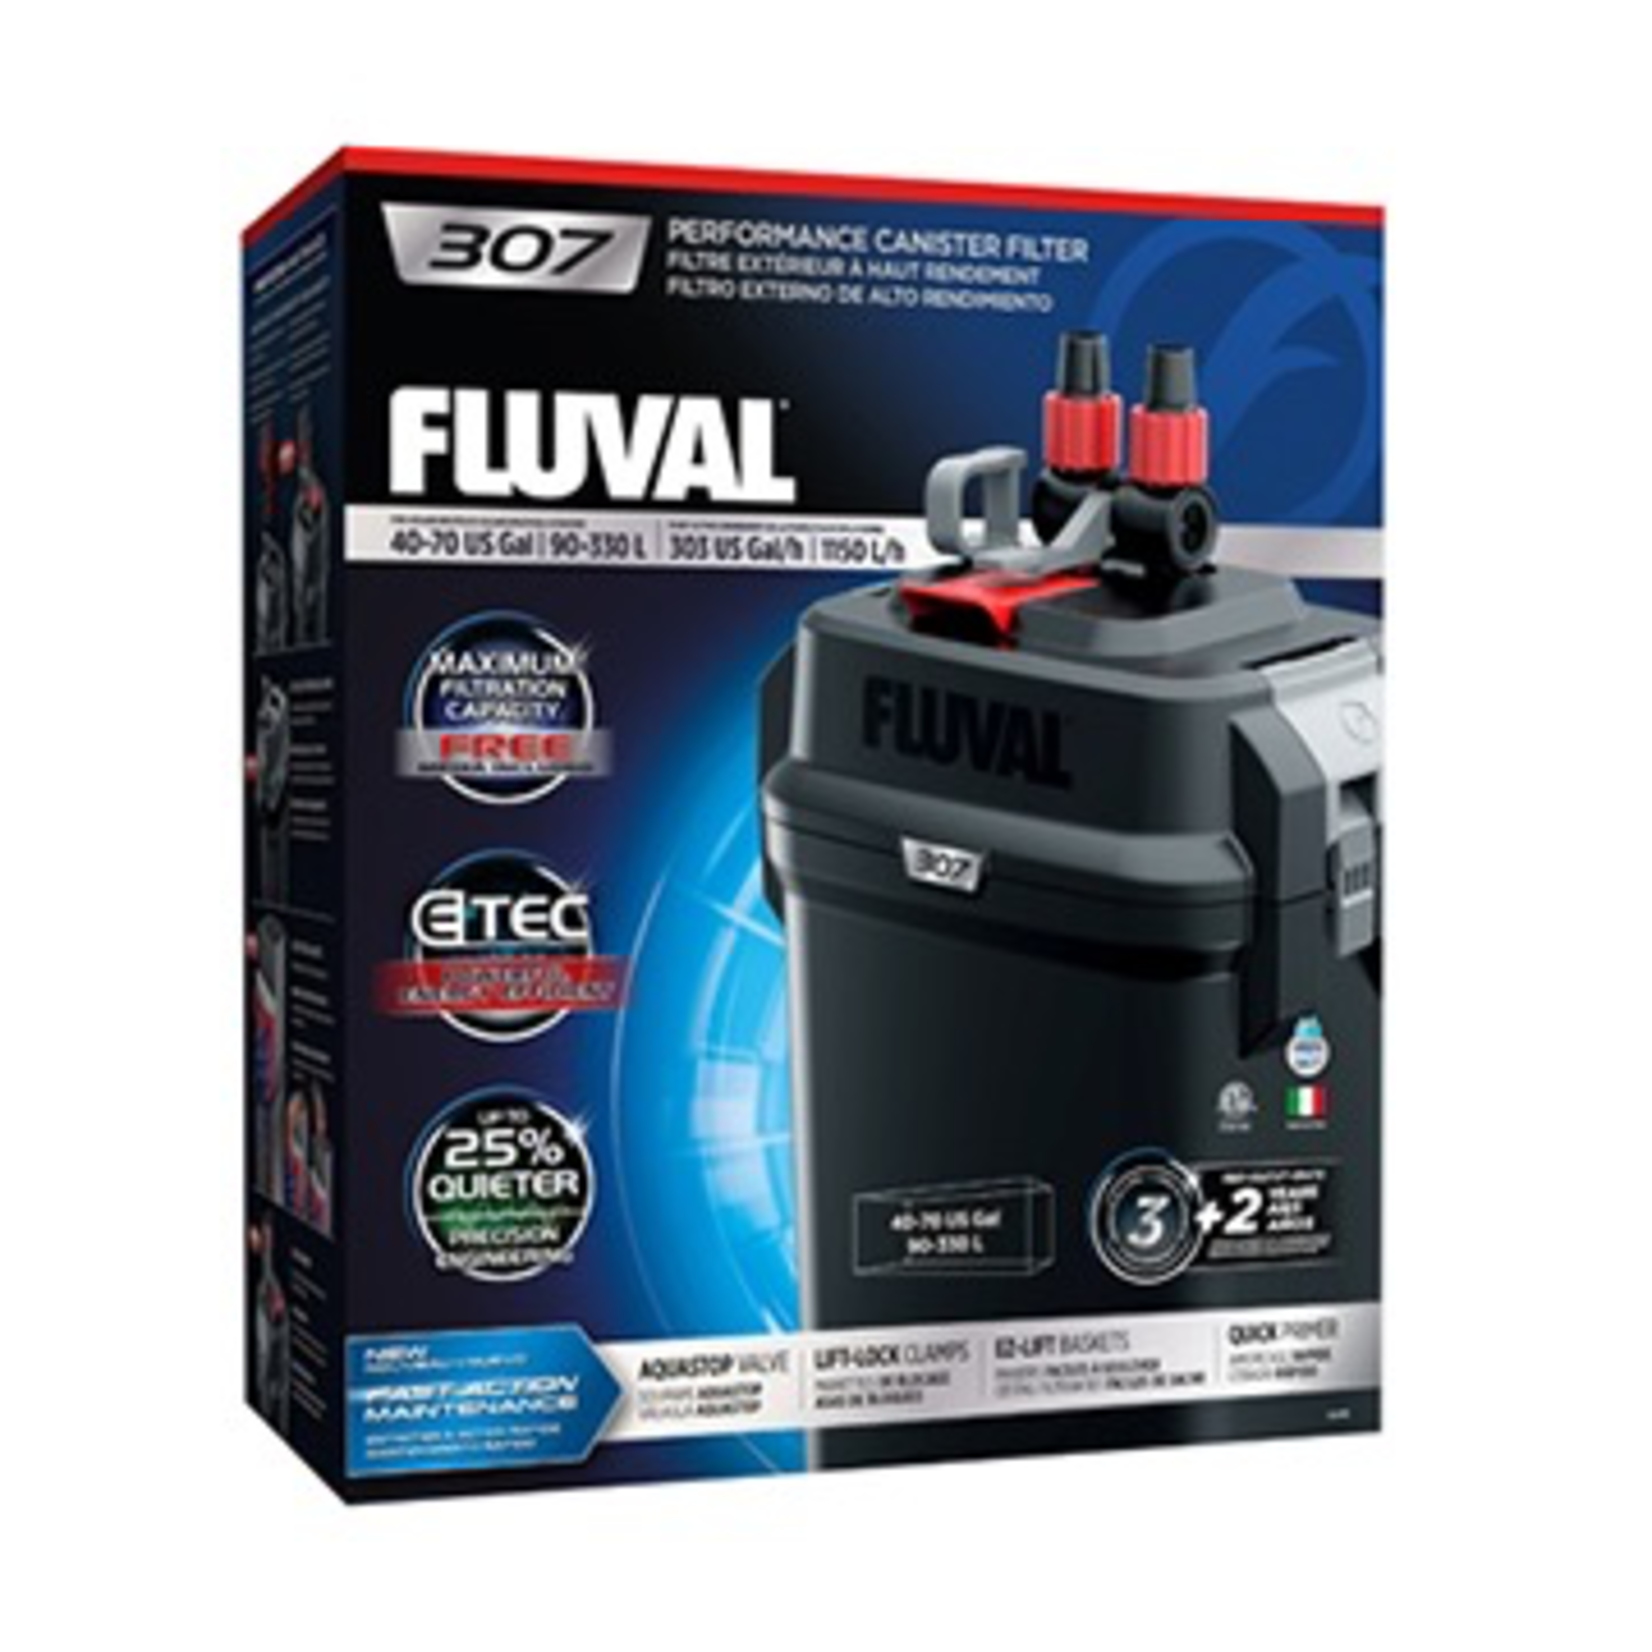 FLUVAL Fluval 307 Performance Canister Filter, up to 330 L (70 US gal)